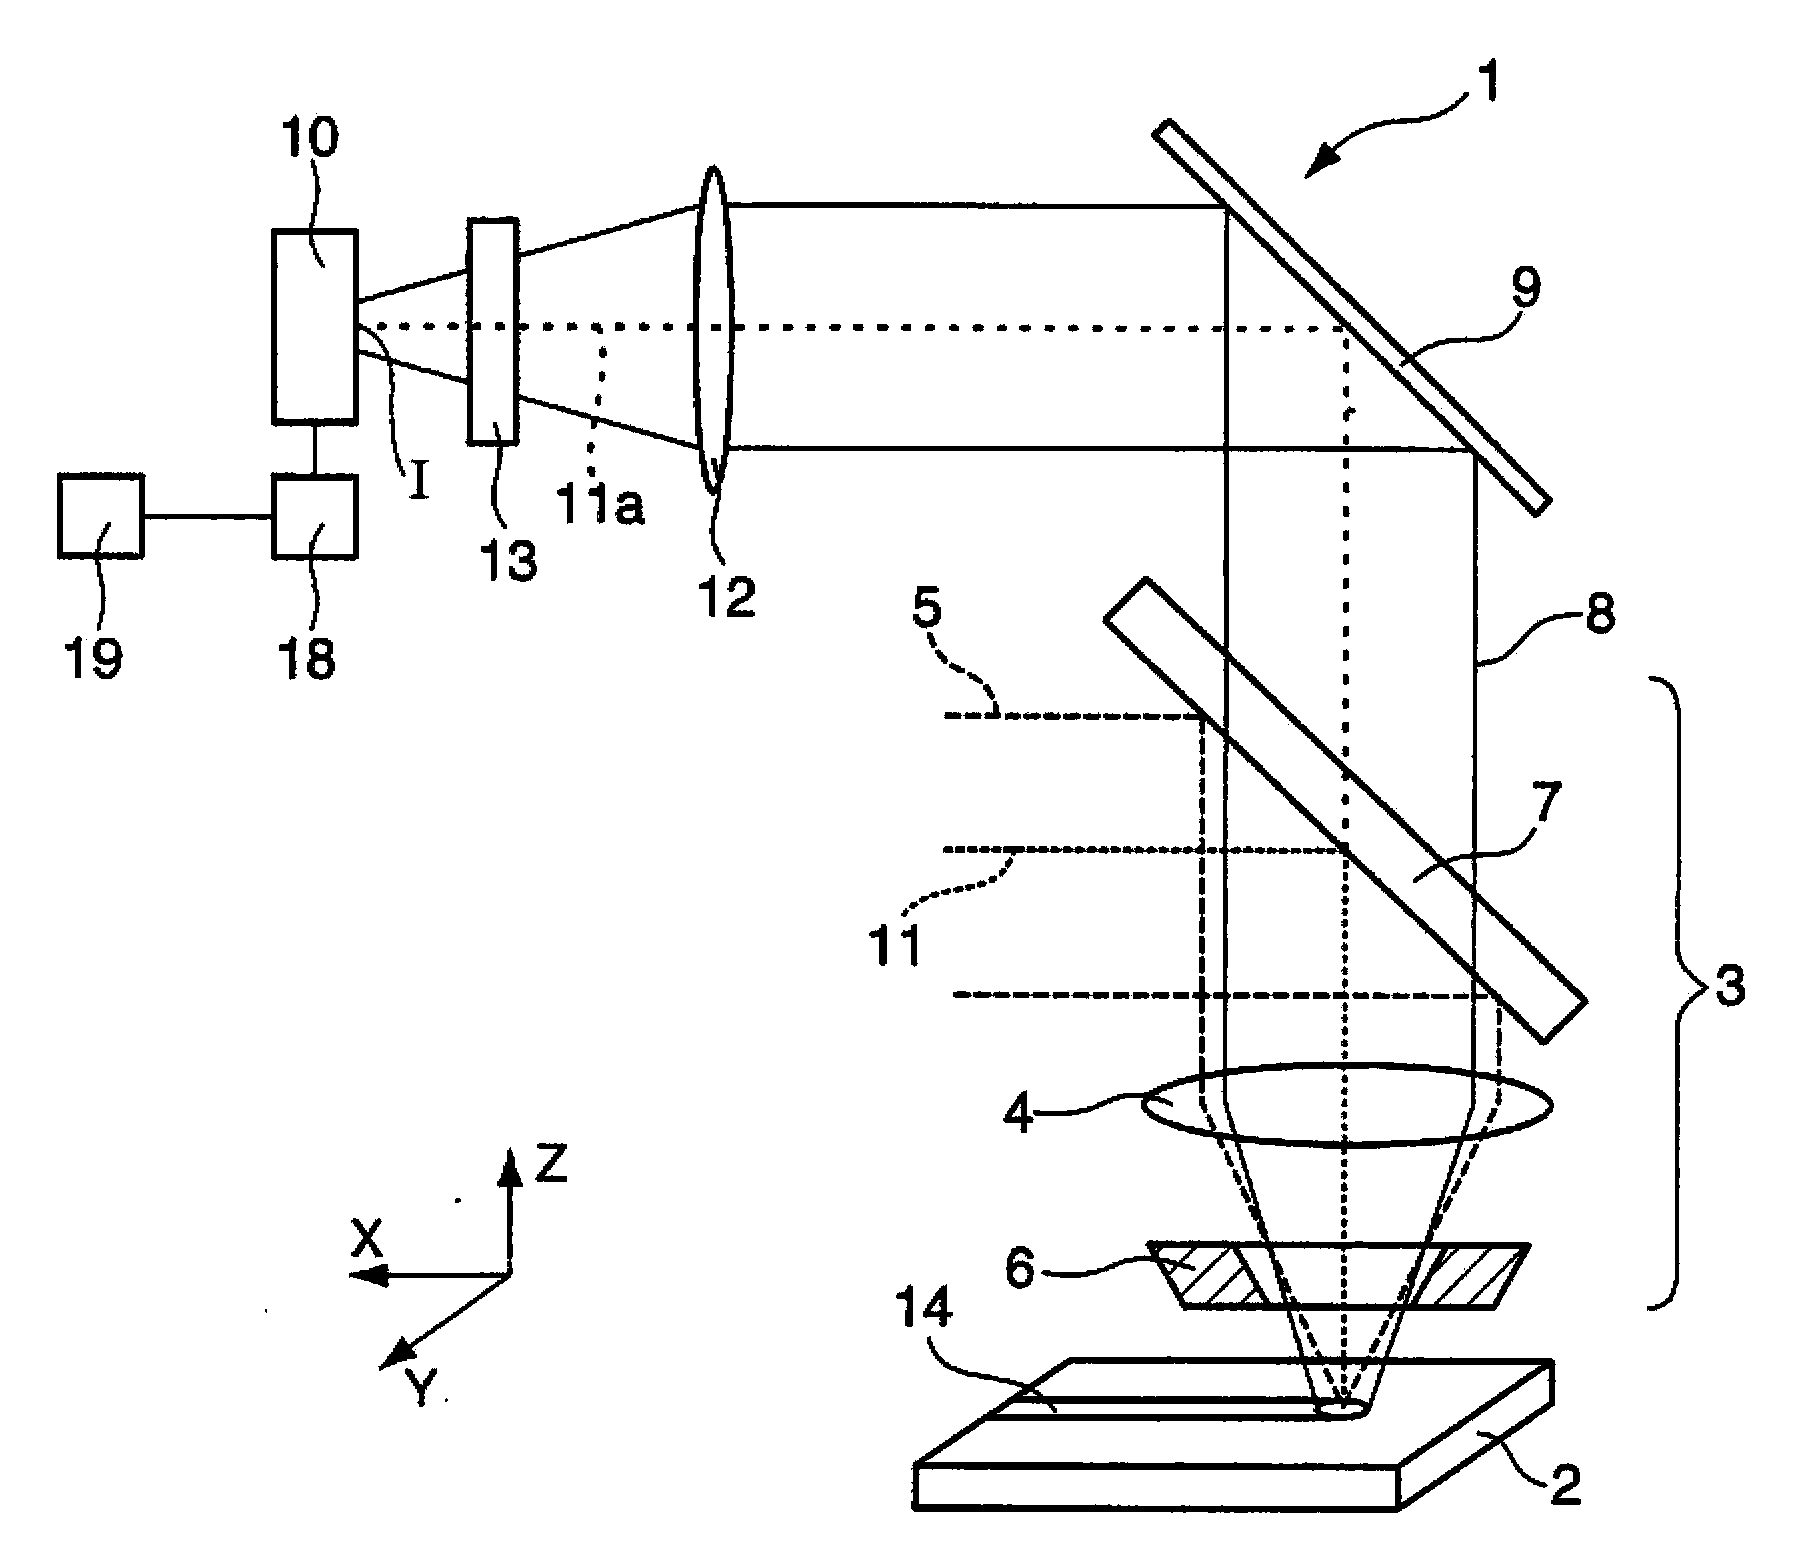 Method for monitoring cutting machining on a workpiece